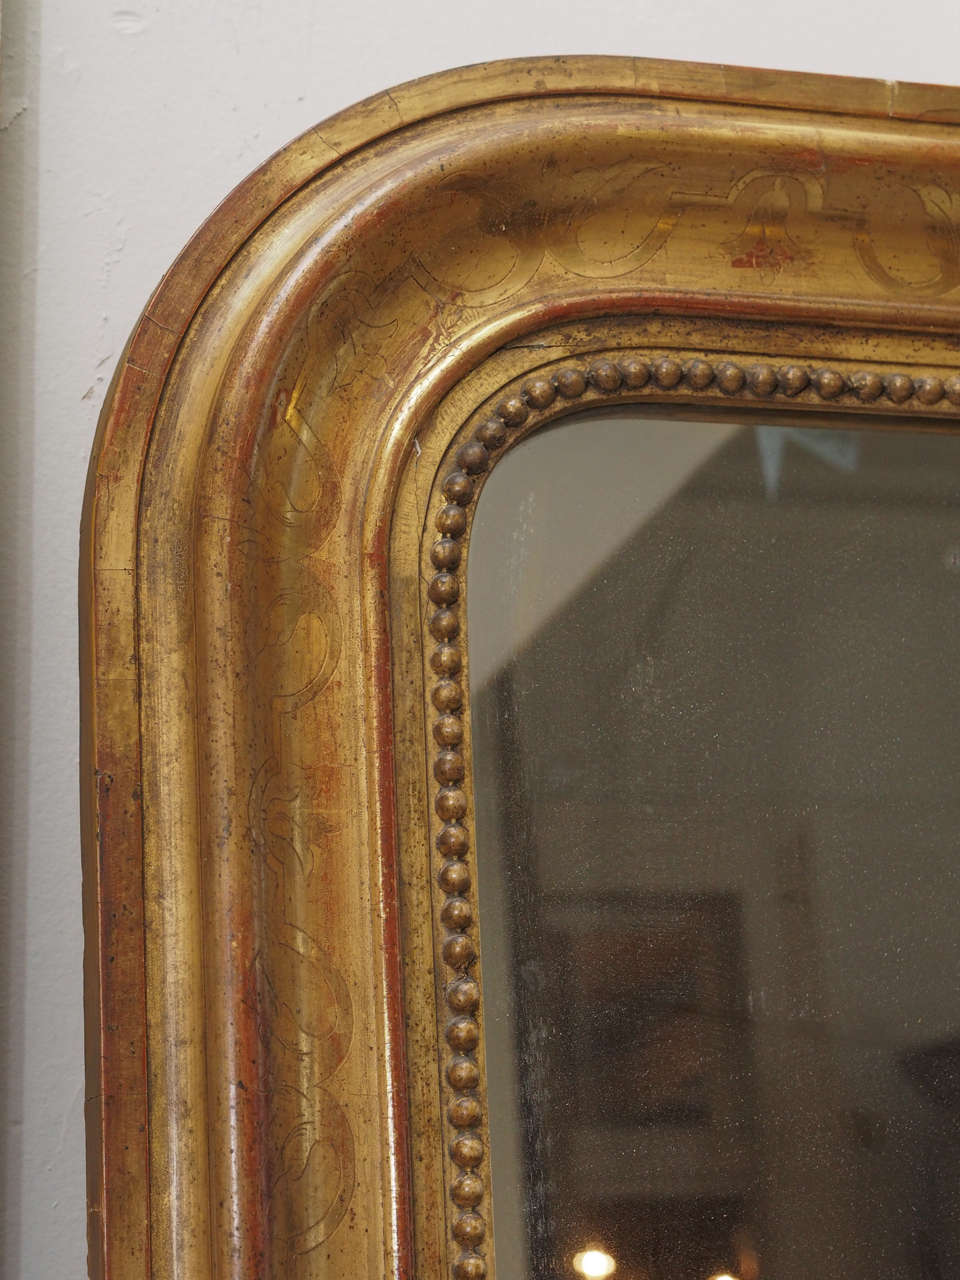 French Louis Philippe Mirror